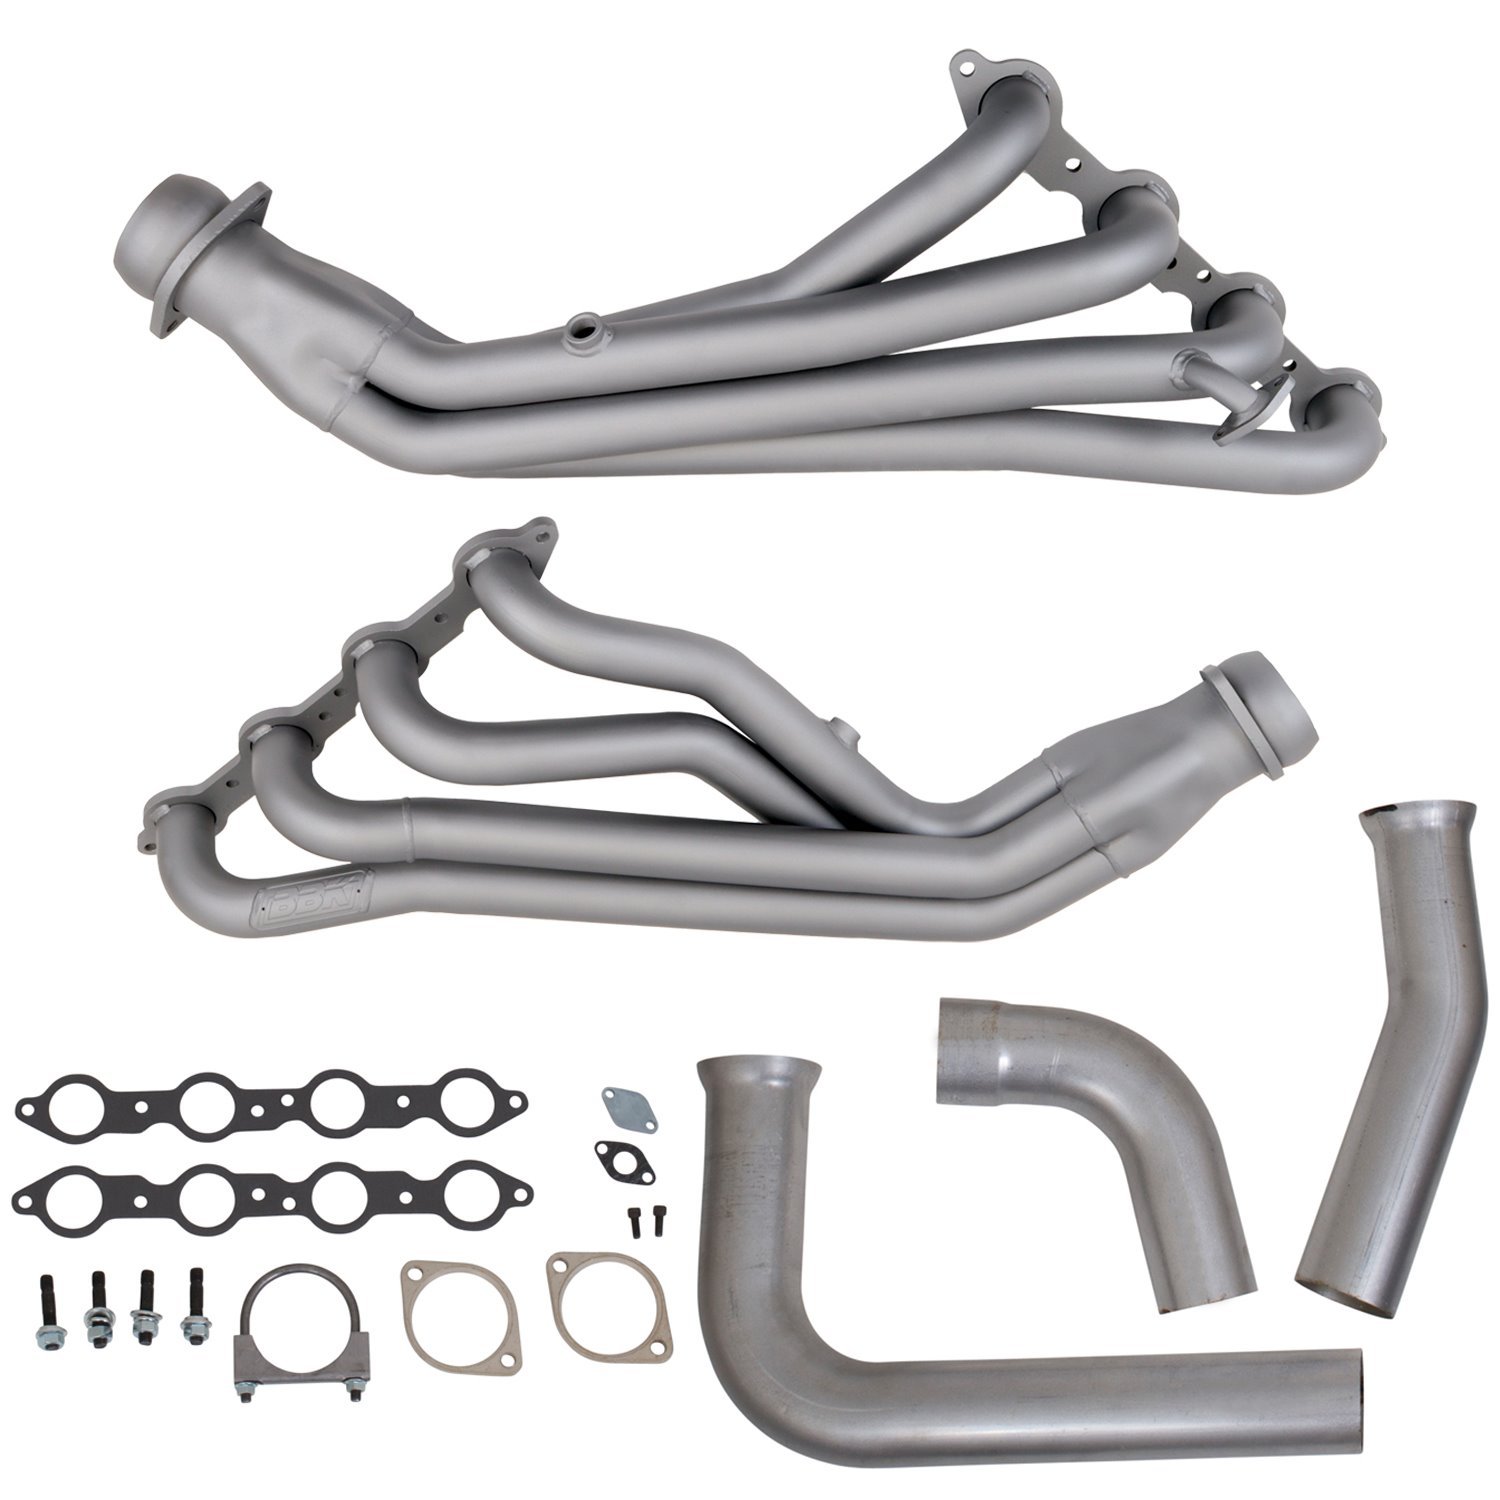 Long Tube Exhaust Headers & Y-Pipe System 1999-2002 GM Full Size Truck 4.8/5.3/6.0L V8 2/4WD [Titanium Ceramic Finish]